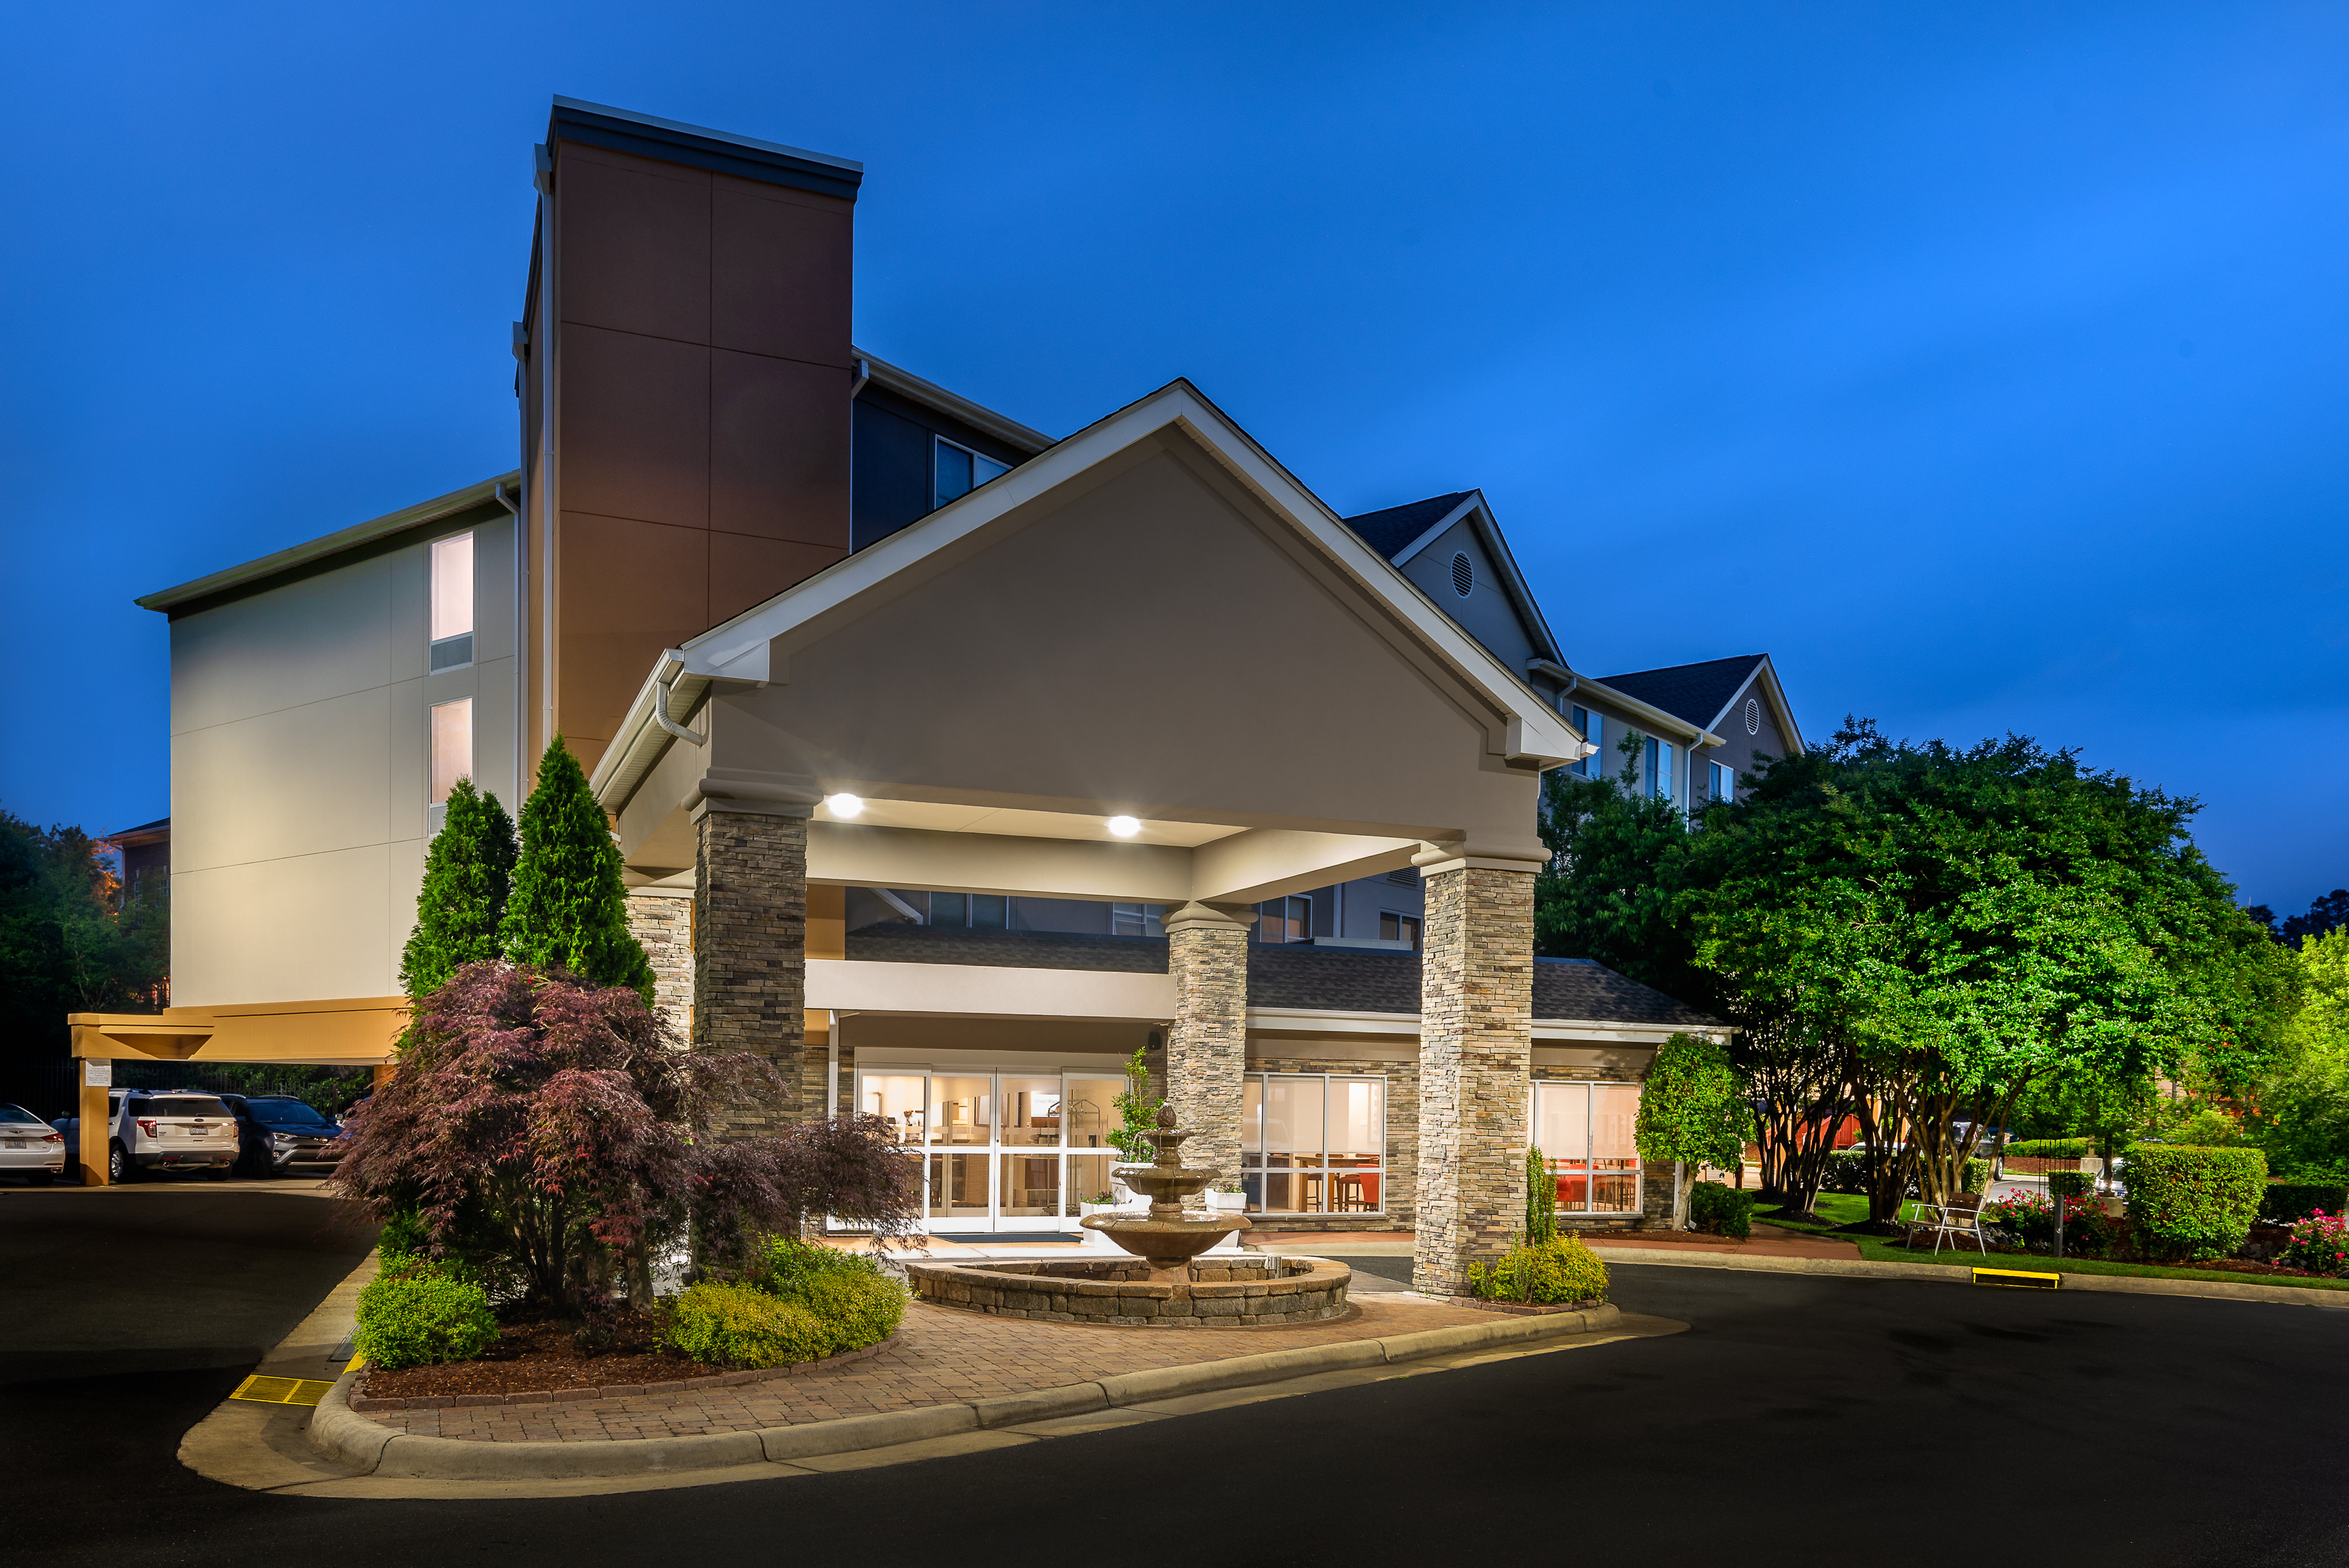 Welcome to the Holiday Inn Express Chapel Hill!